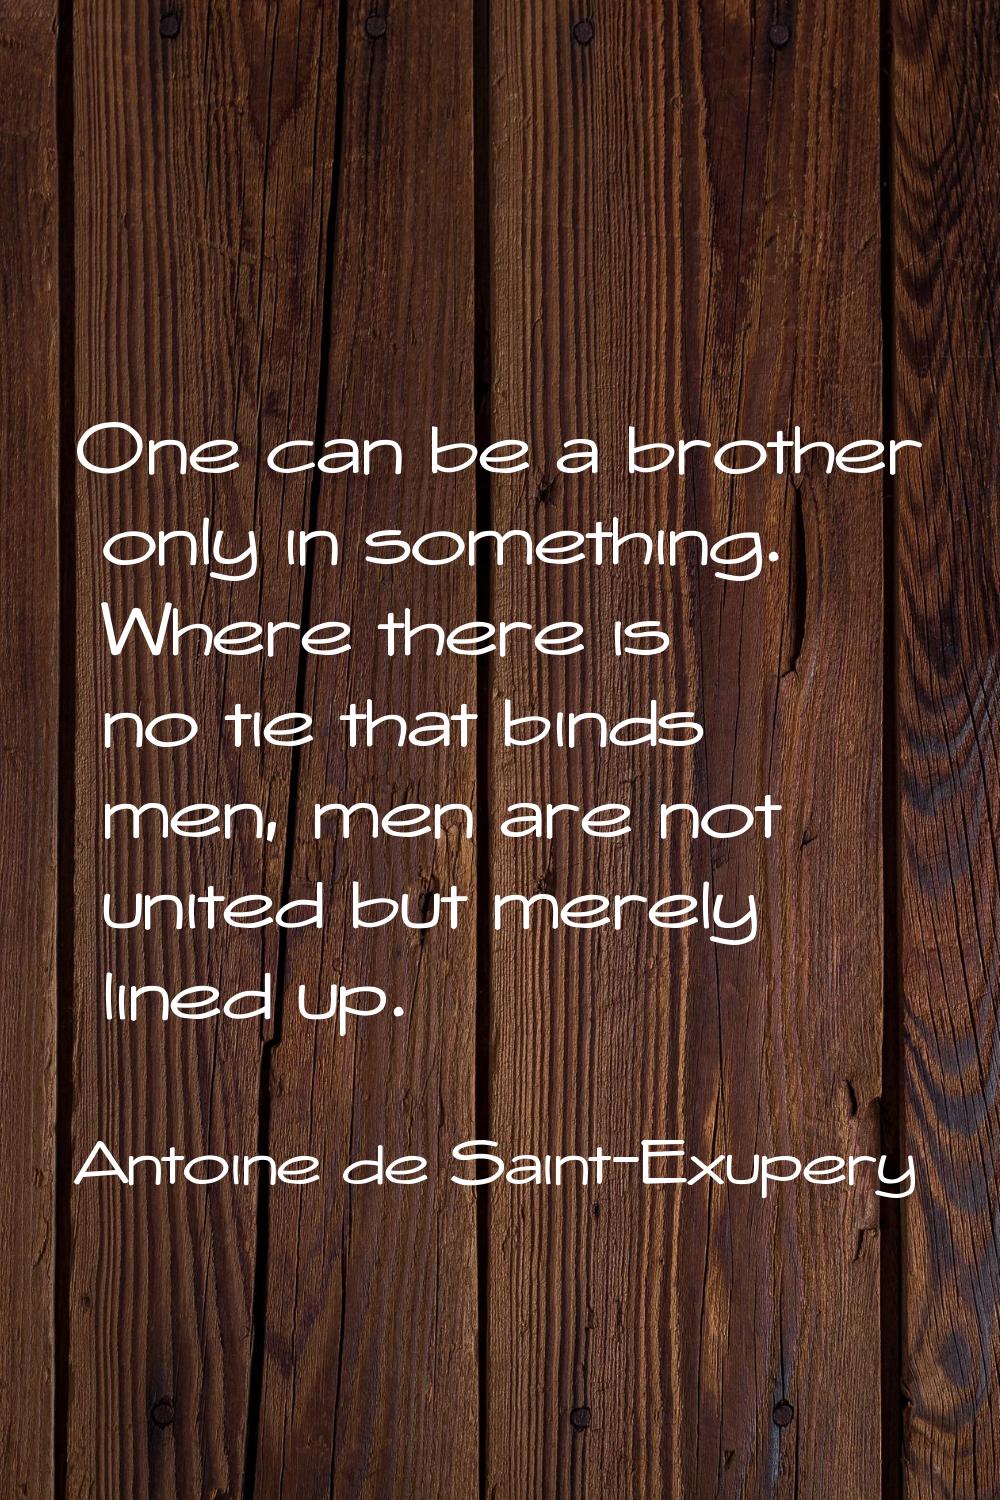 One can be a brother only in something. Where there is no tie that binds men, men are not united bu